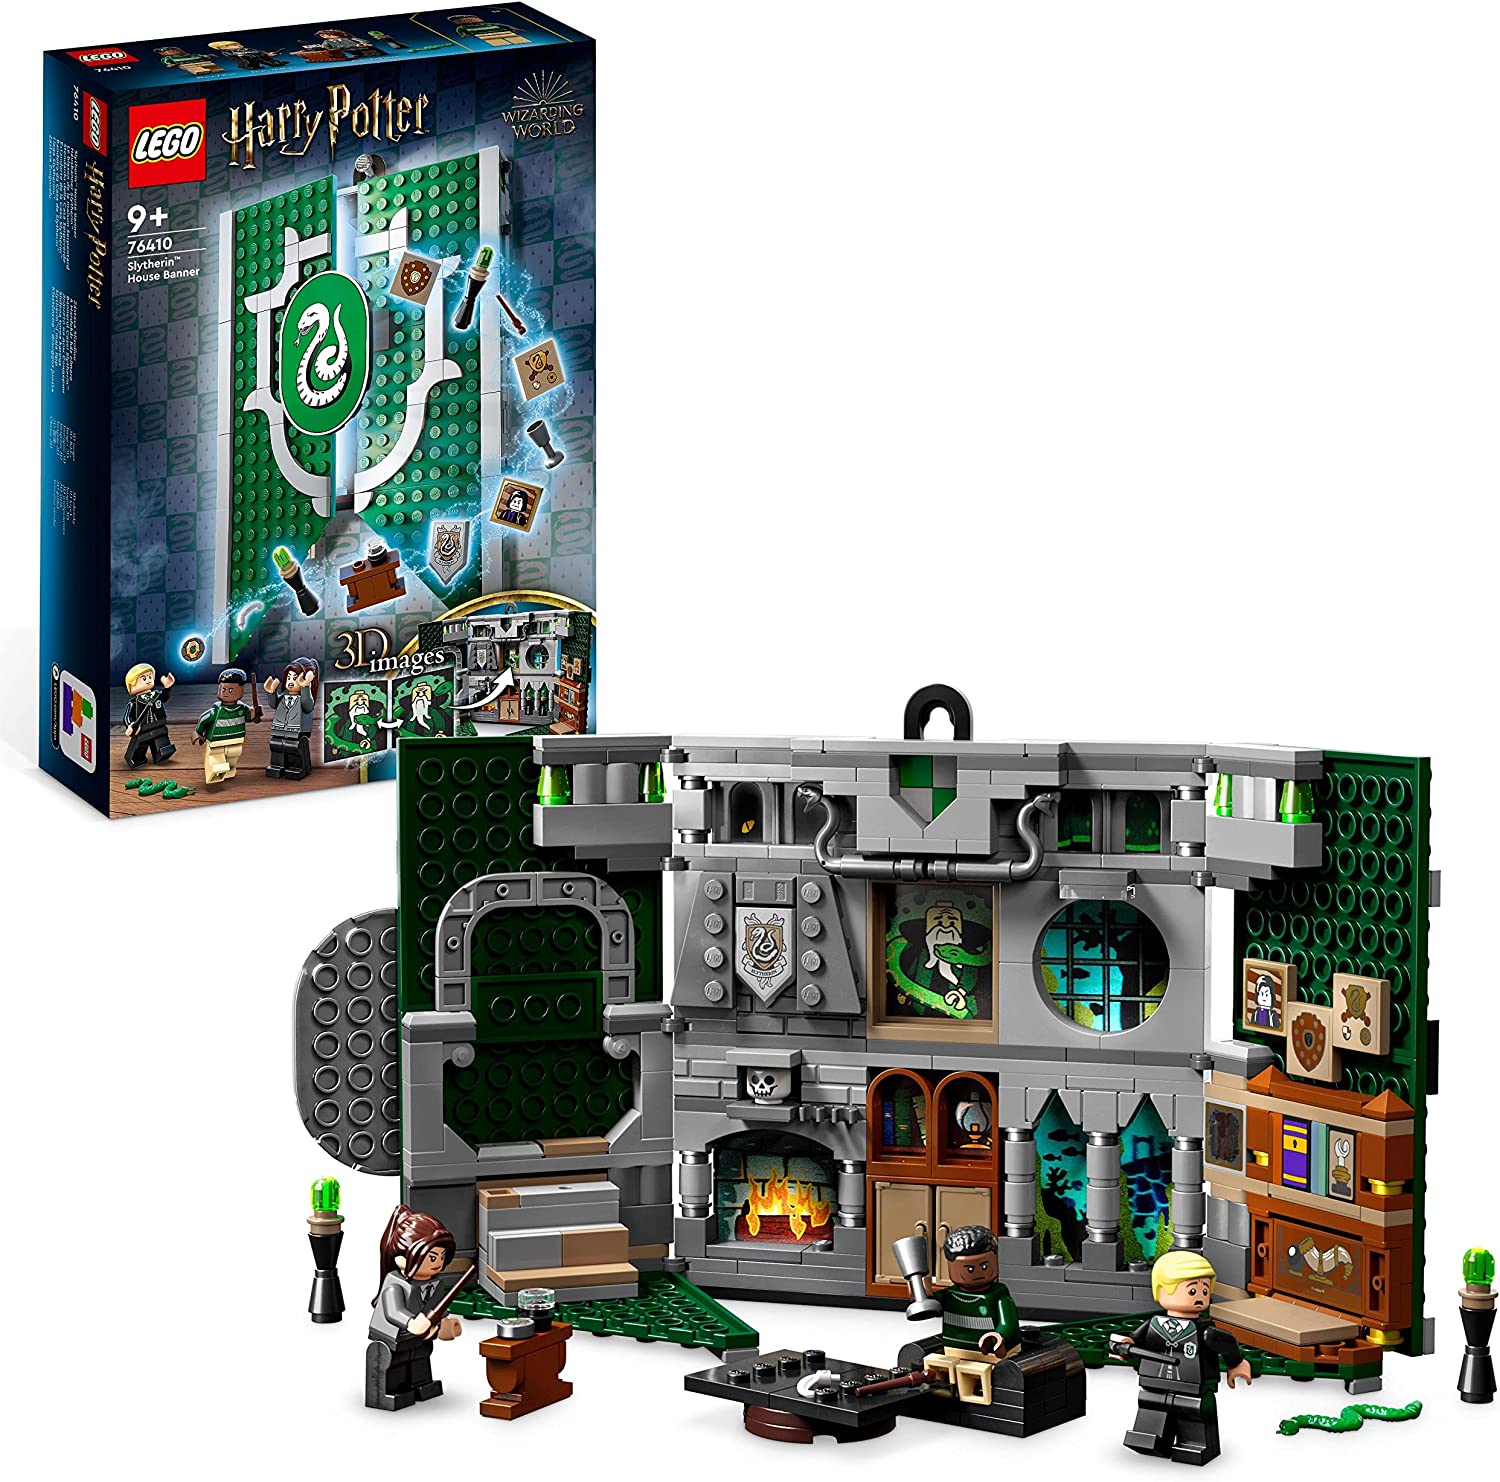 LEGO 76410 Harry Potter House Banner Slytherin Set, Hogwarts Coat of Arms, Castle Community Room Toy or Wall Display, Collectable Travel Toy with Draco Malfoy Mini Figure